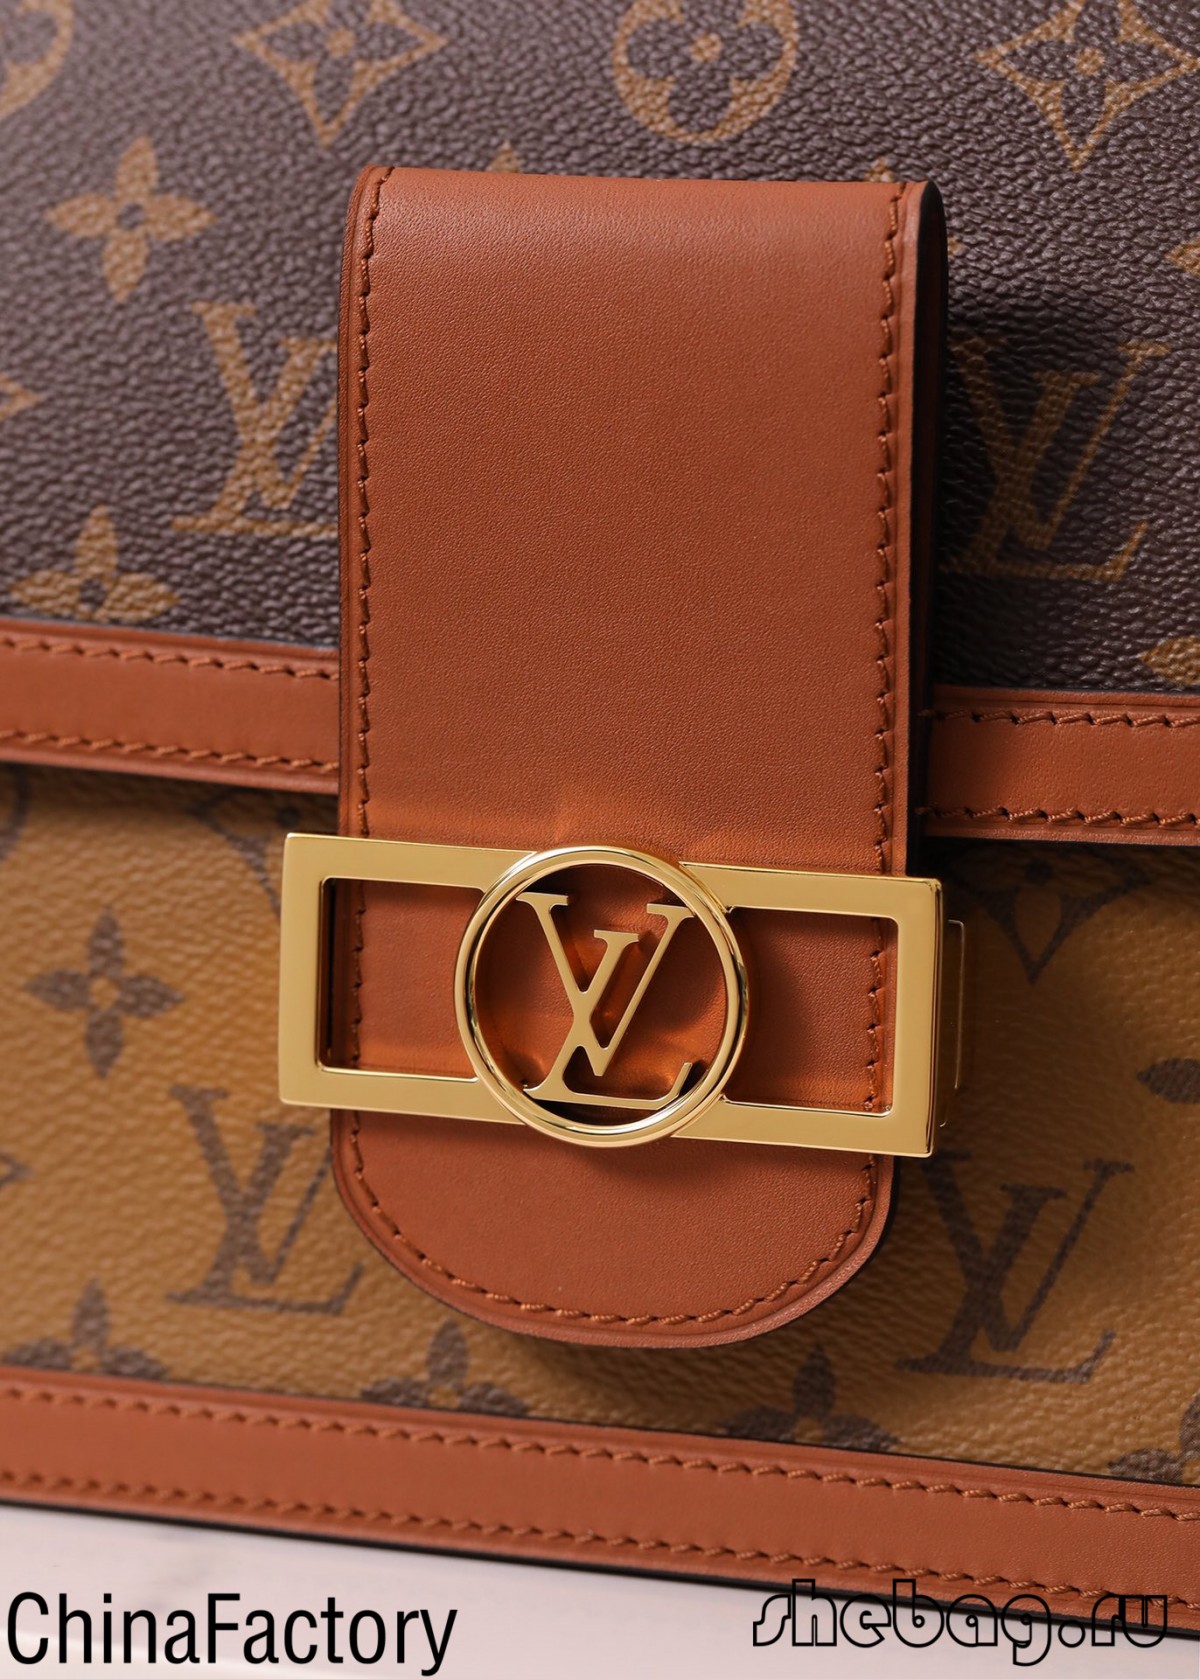 I want to buy replica designer bags, DHGate best seller recommendation? (2022 update)-Best Quality Fake Louis Vuitton Bag Online Store, Replica designer bag ru